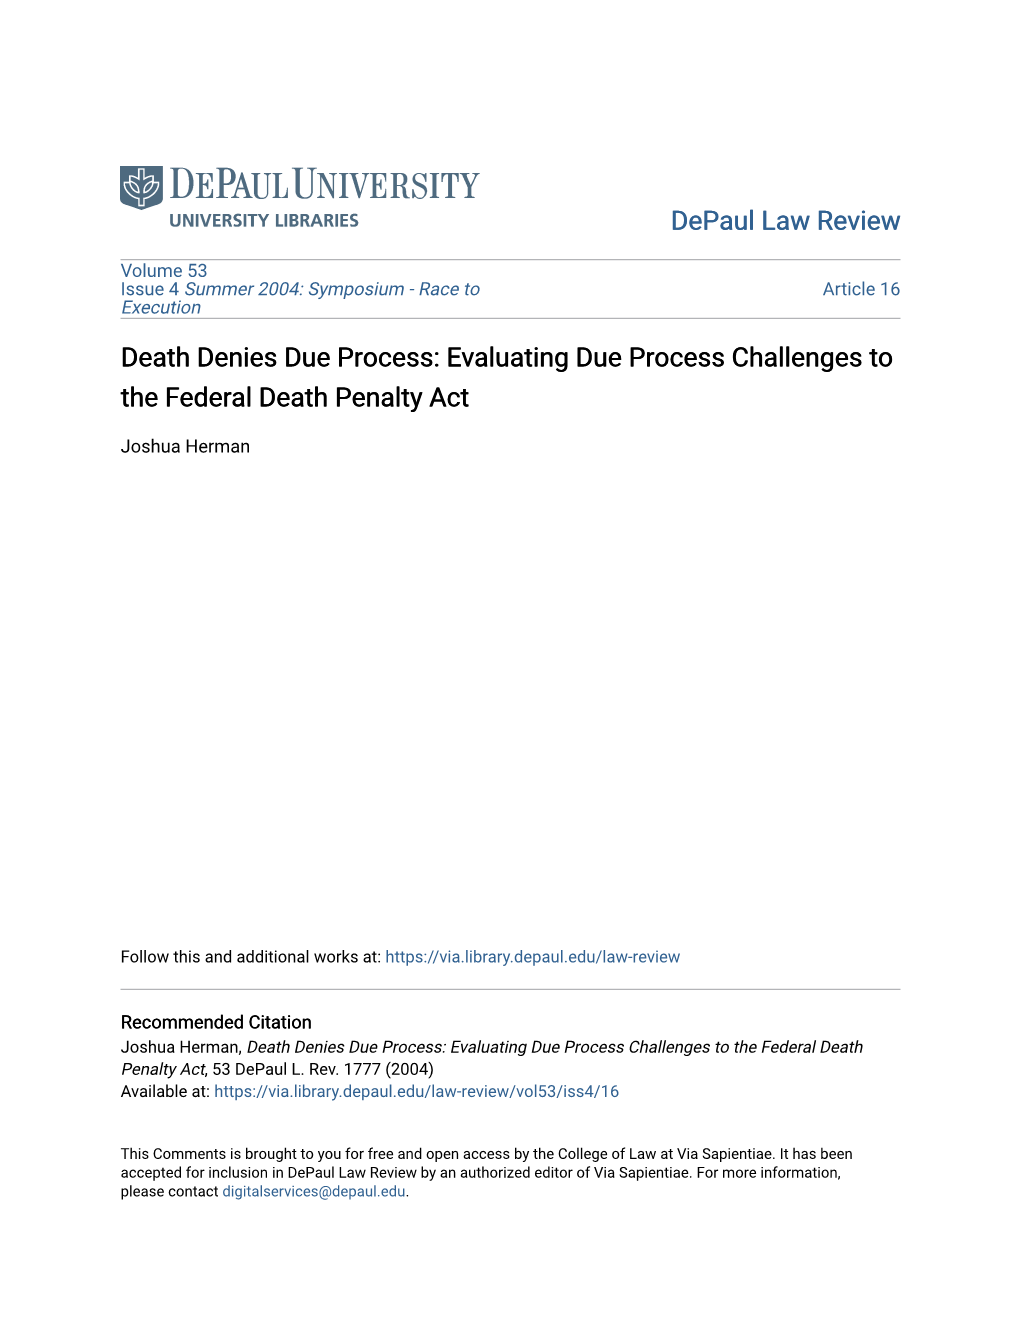 Evaluating Due Process Challenges to the Federal Death Penalty Act